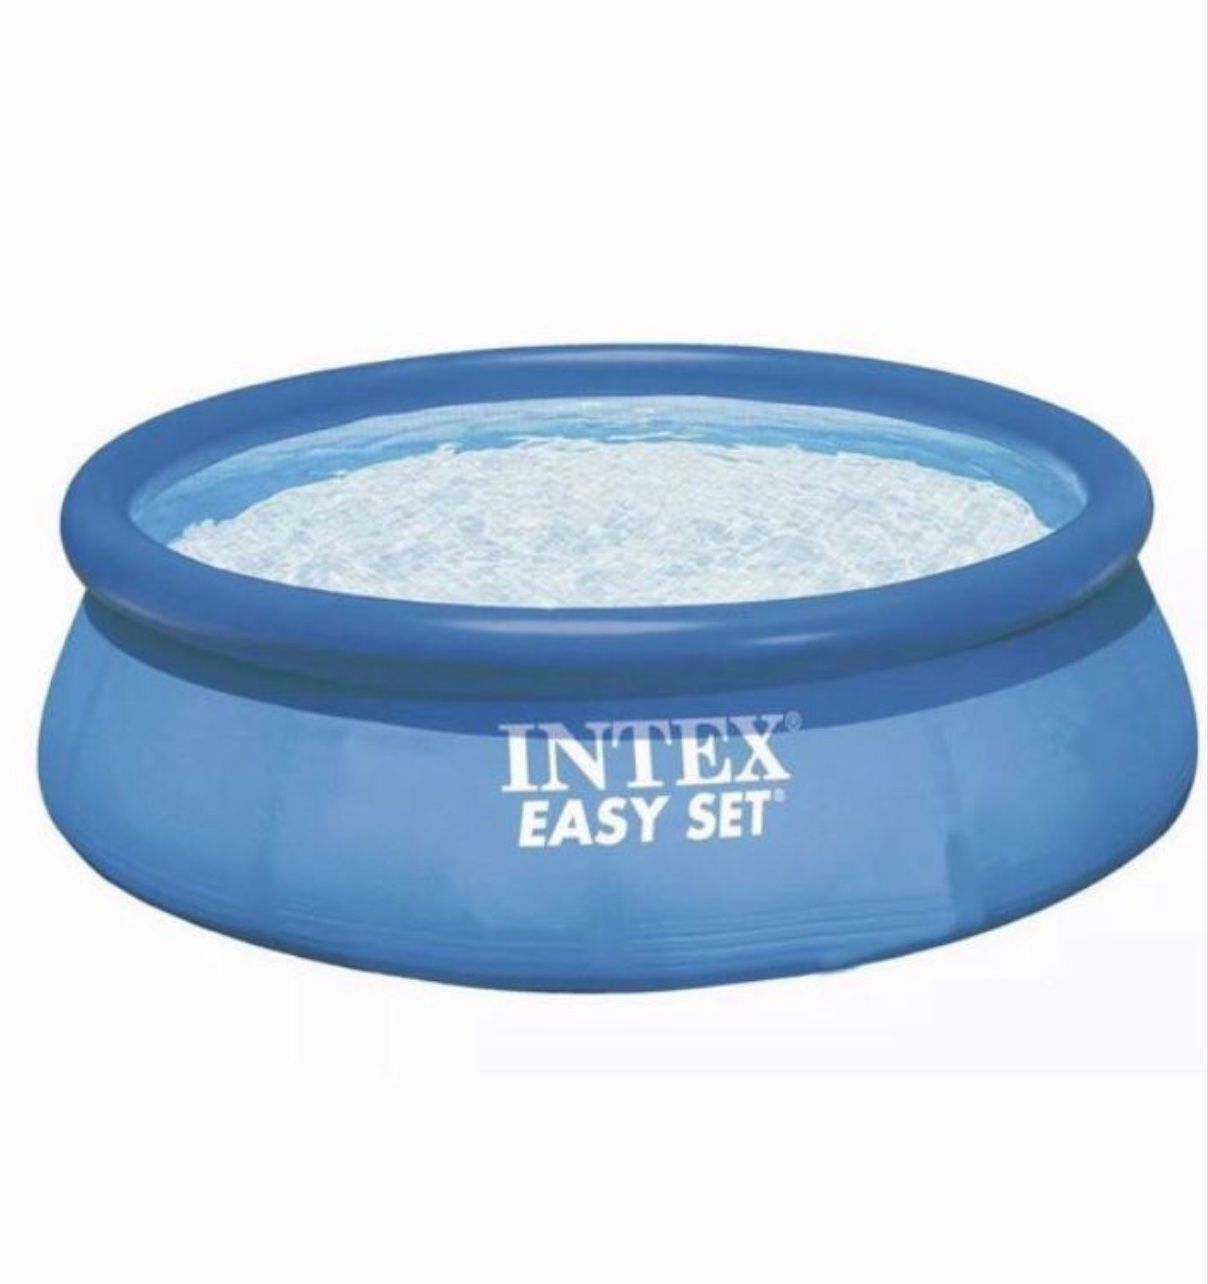 Intex easy set pool 10ft, with pump and cover tent